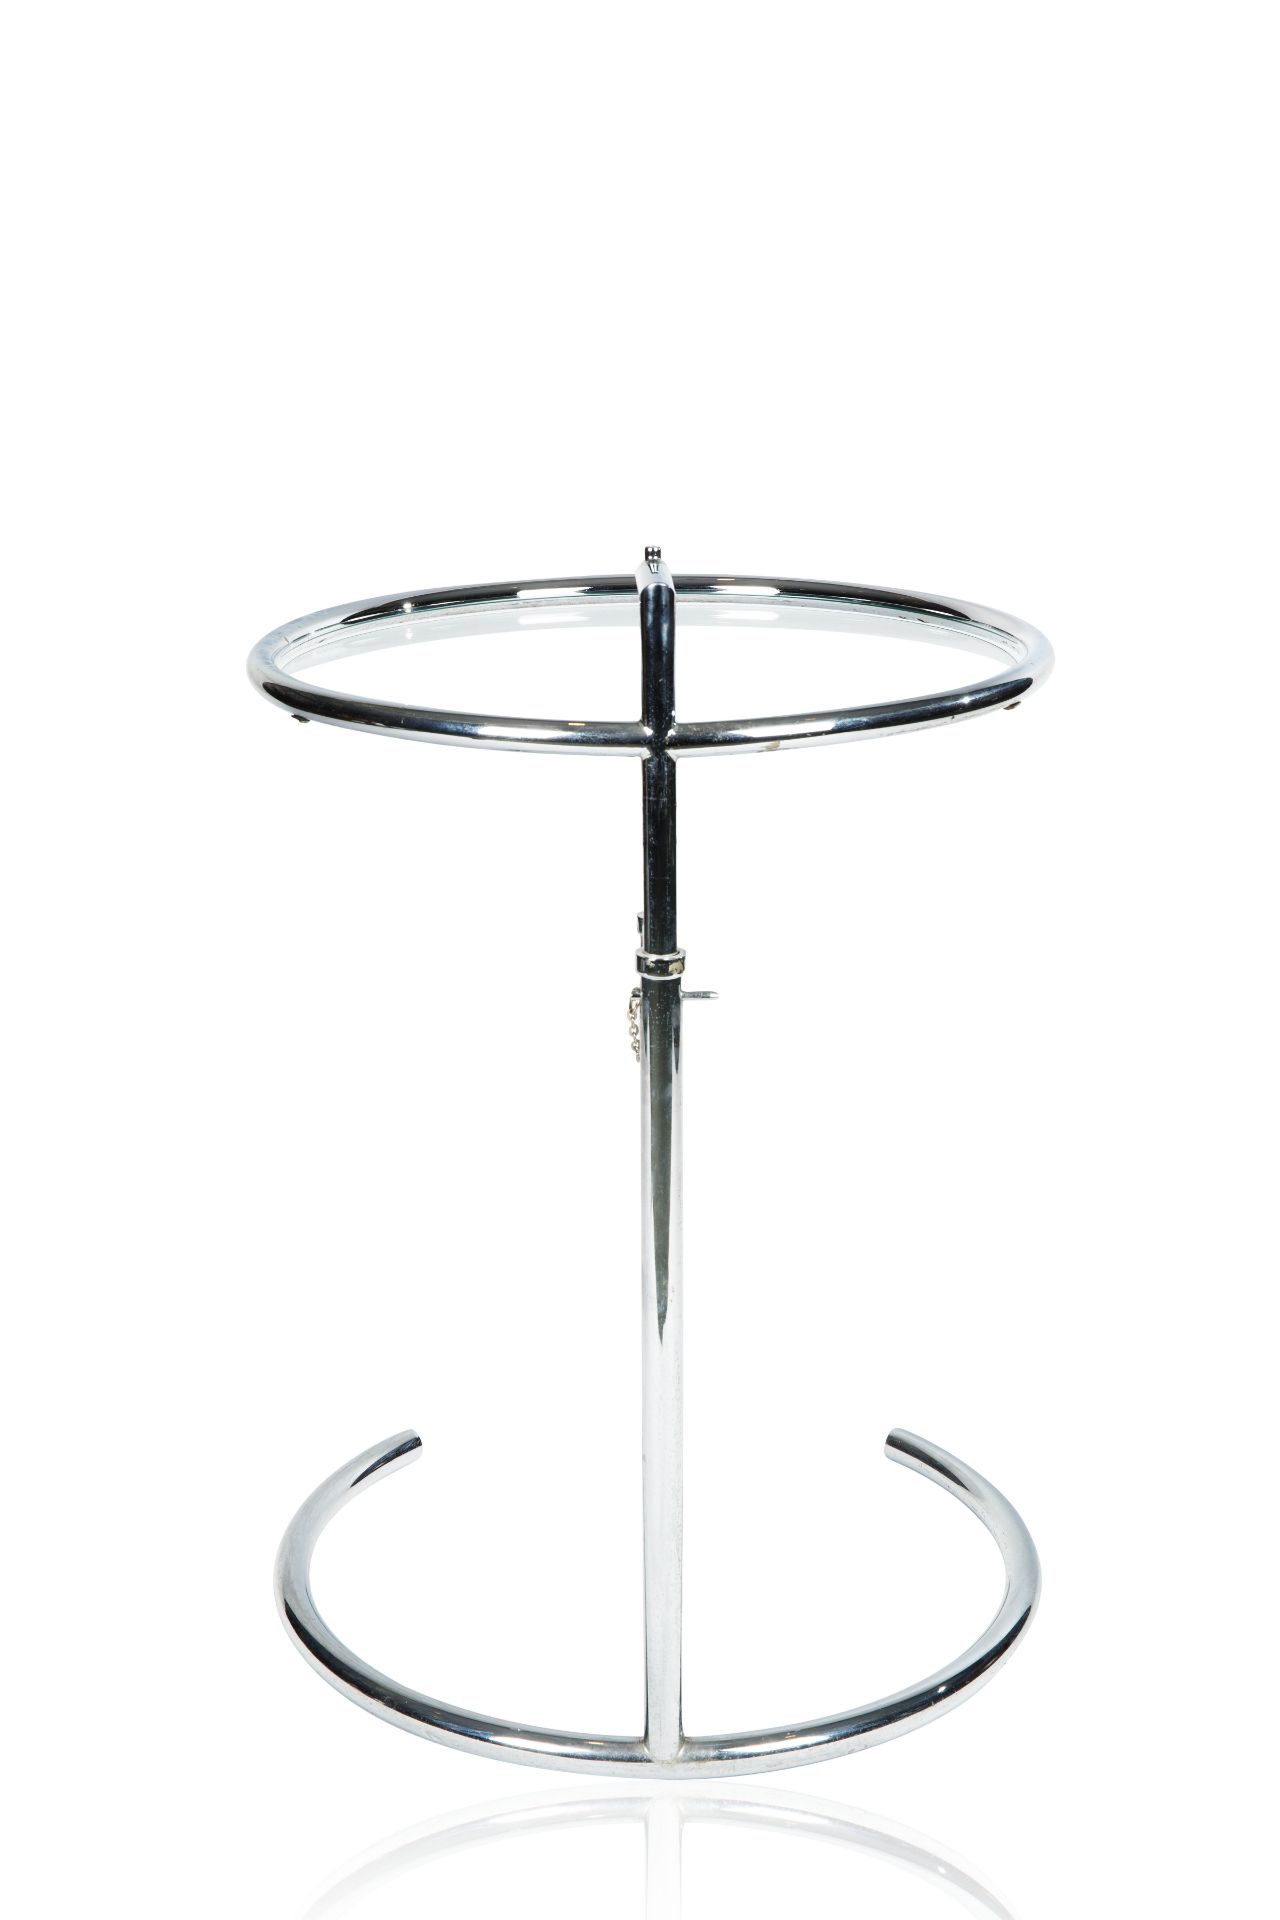 A EILEEN GRAY E1027 CHROME AND GLASS SIDE TABLE - Image 2 of 4